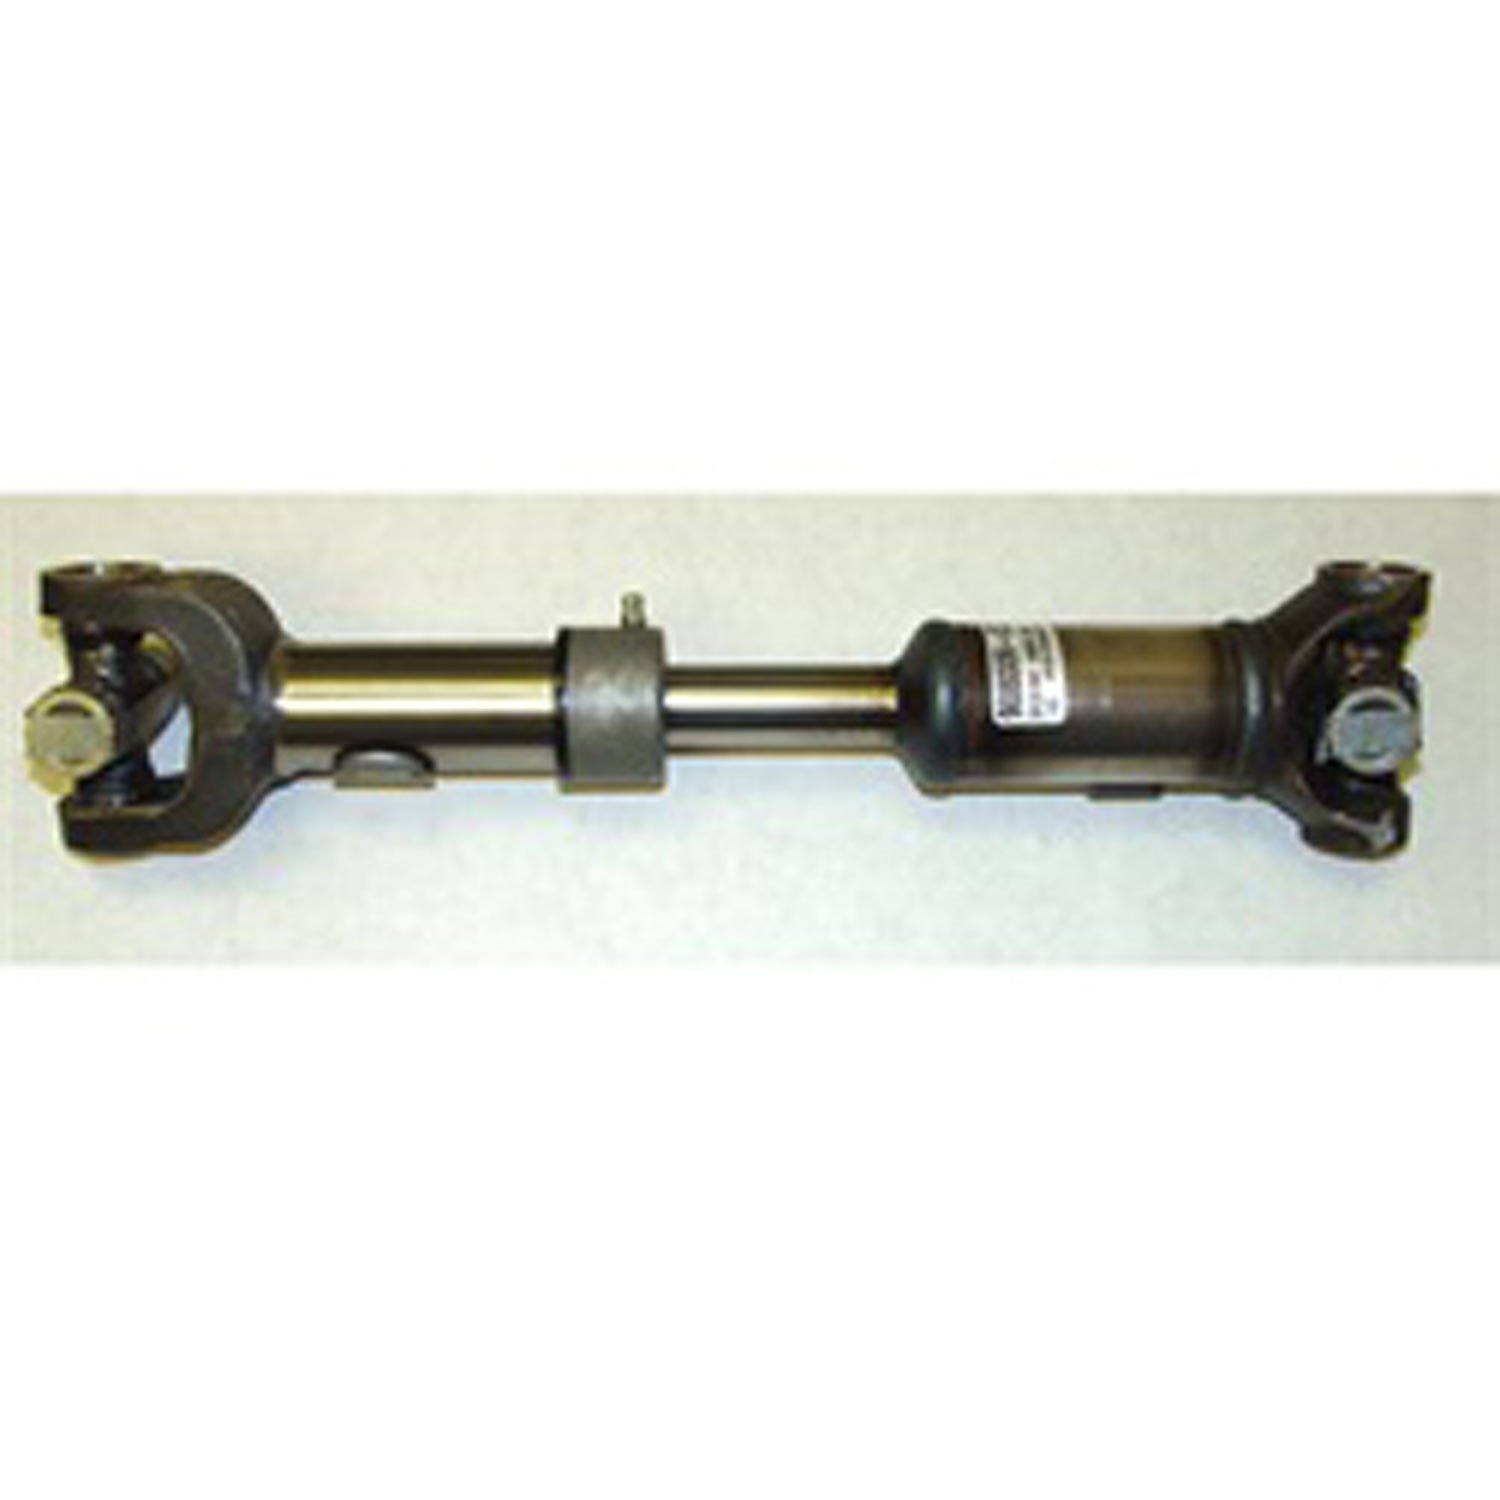 Stock replacement rear driveshaft from Omix-ADA, Fits 82-83 Jeep CJ5 with 4 or 6-cylinder engine